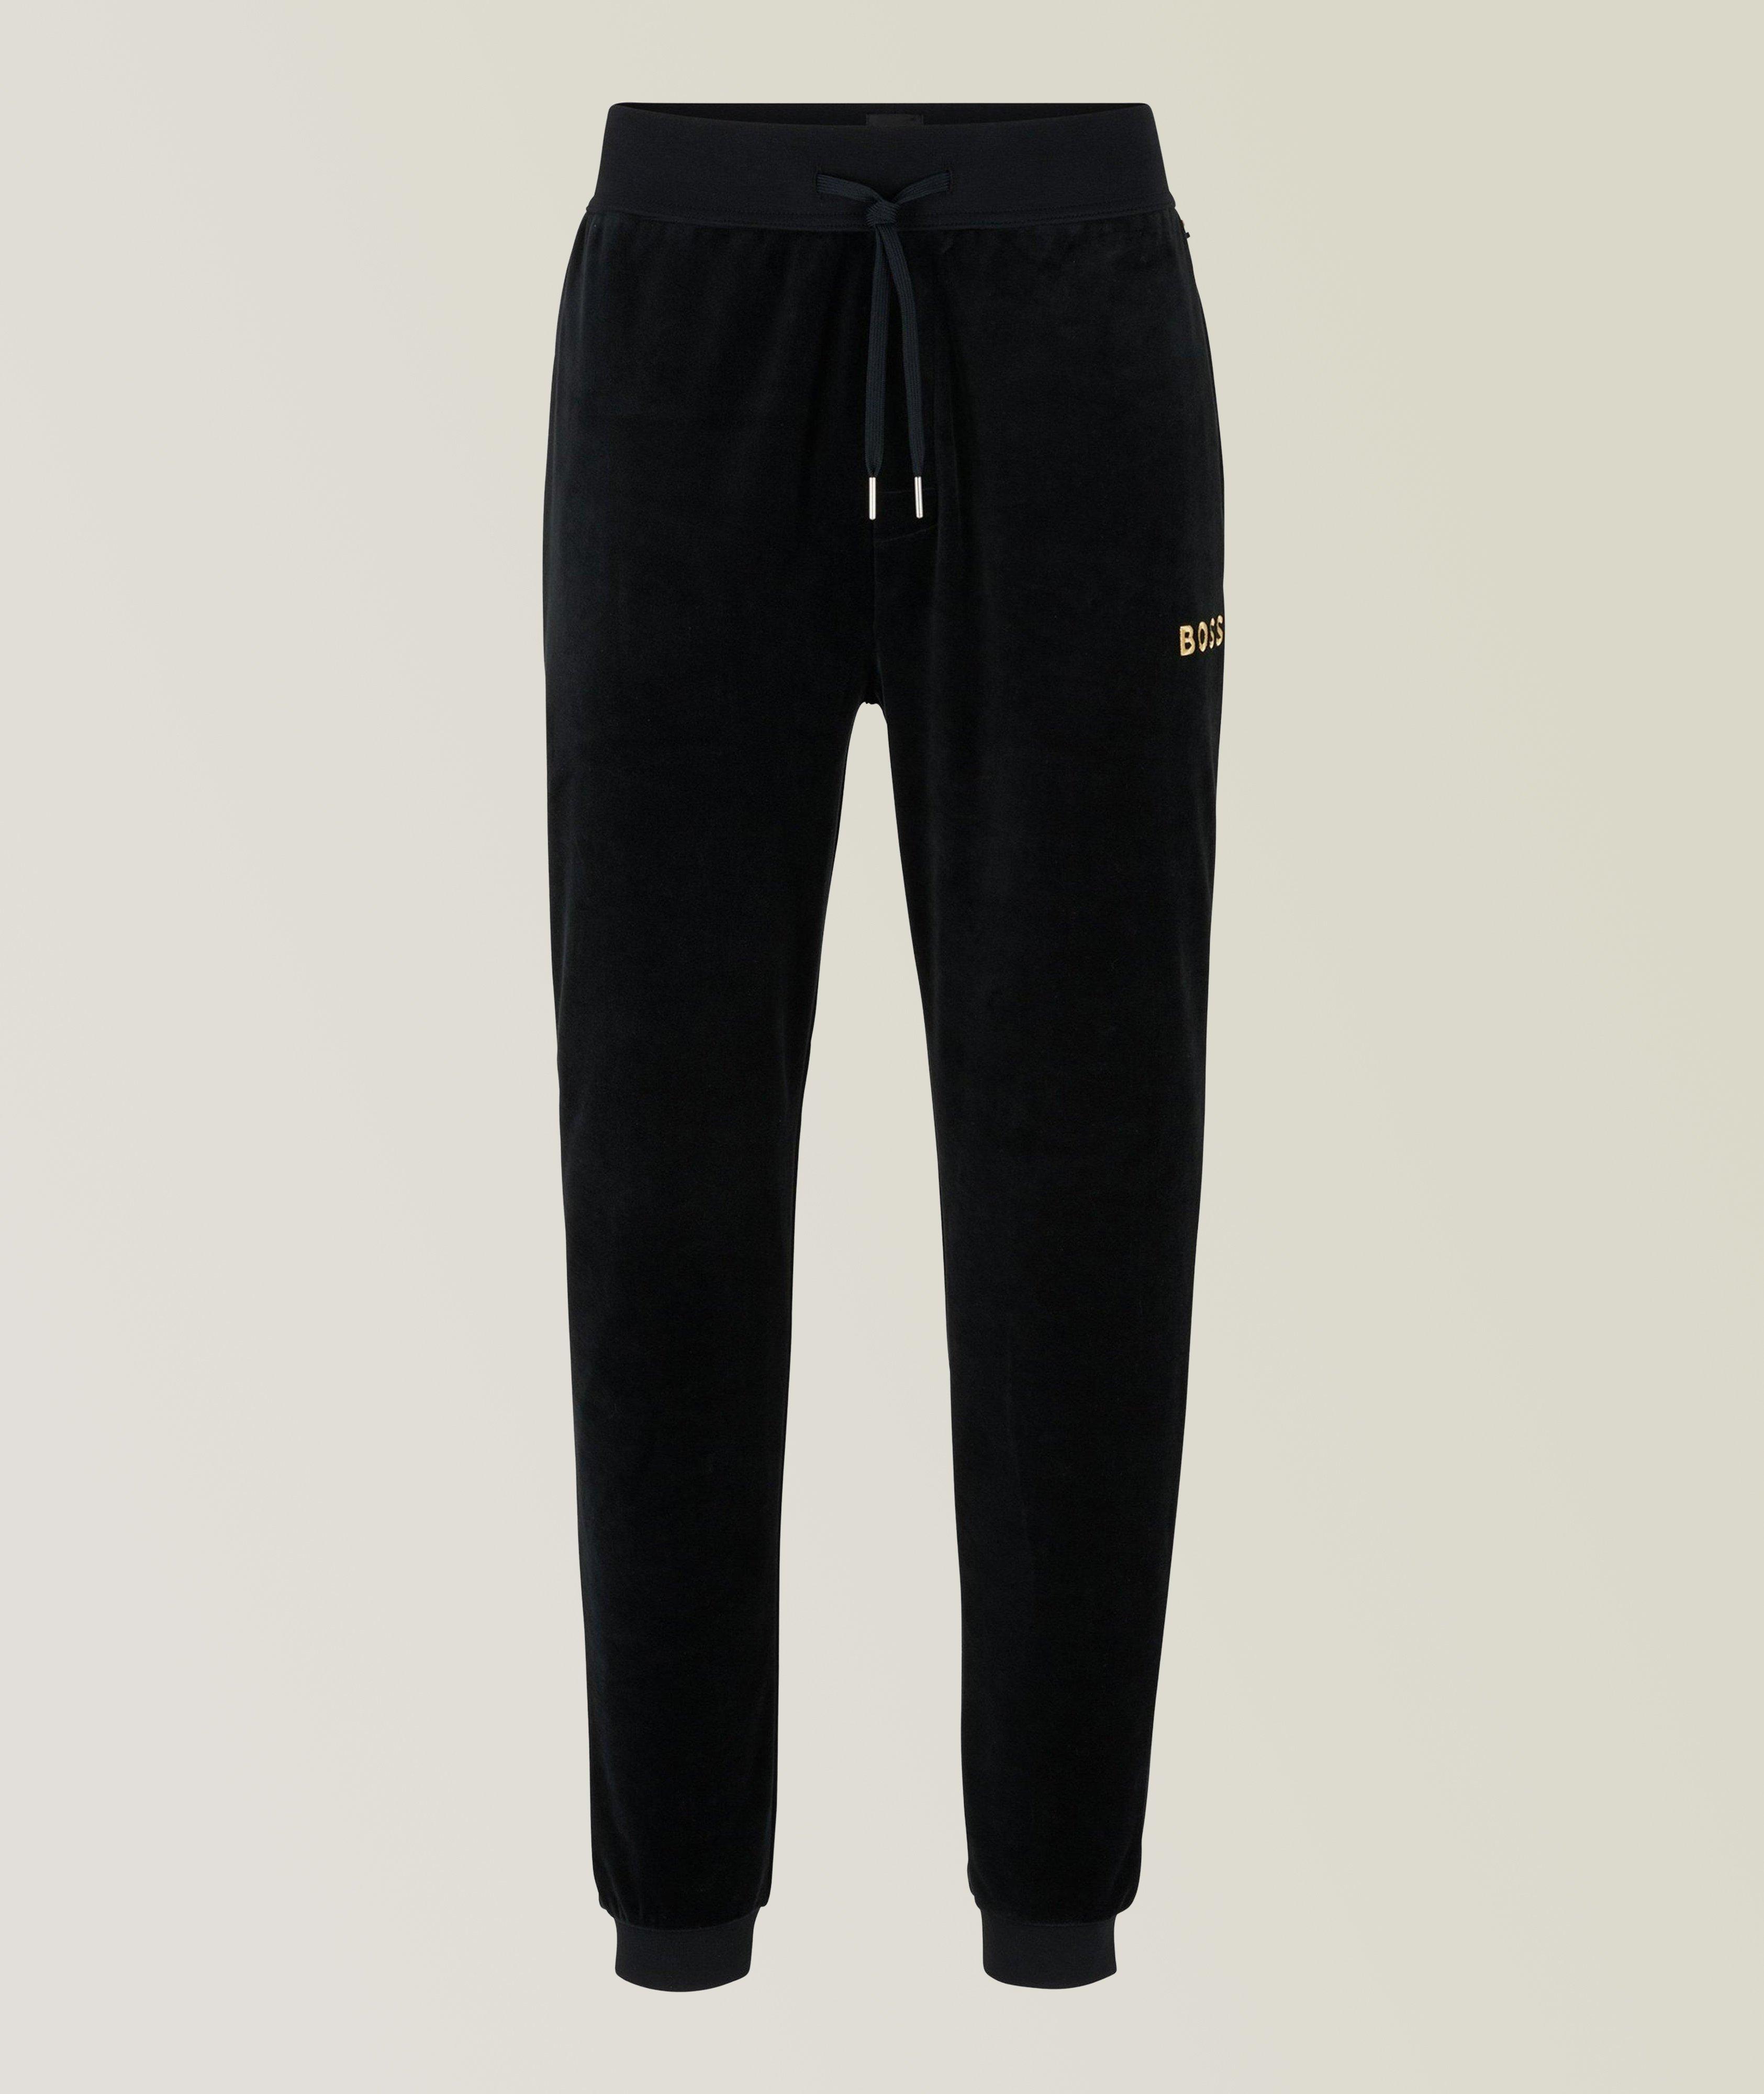 Cotton-Blend Velour Embroidered Joggers image 0